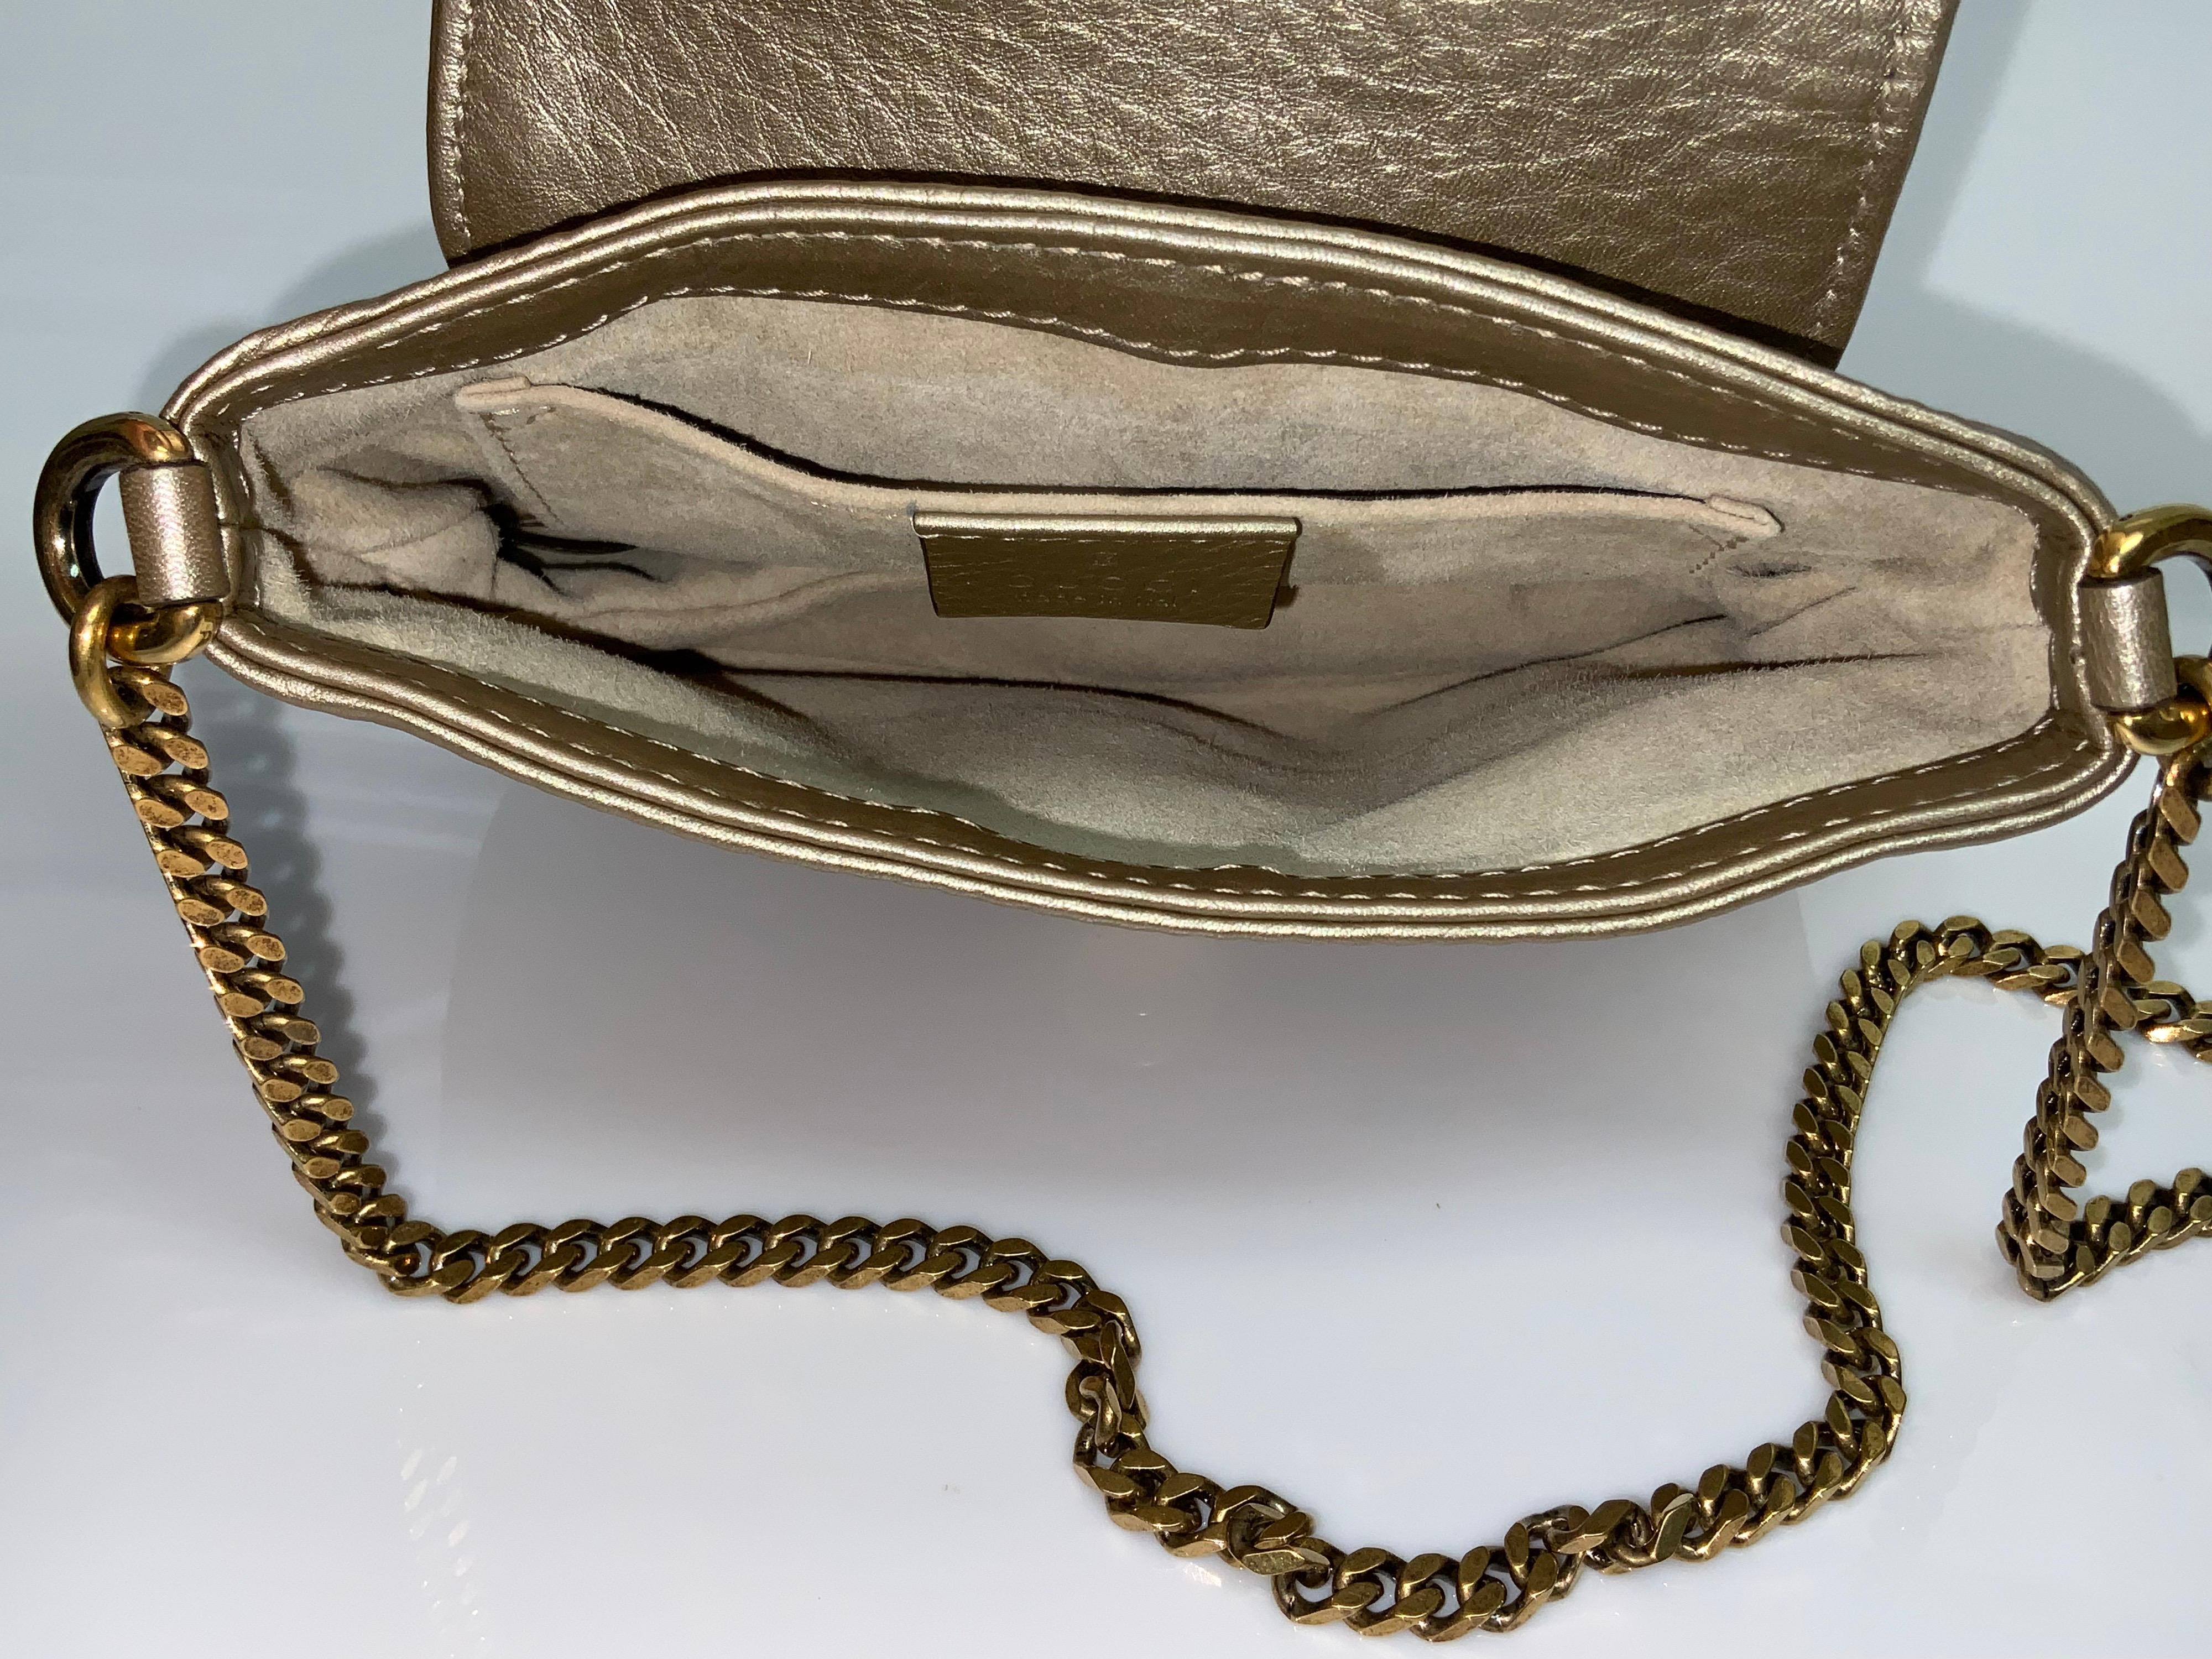 Gucci 1973 Bronze Small Crossbody Handbag - GHW In Excellent Condition For Sale In West Palm Beach, FL